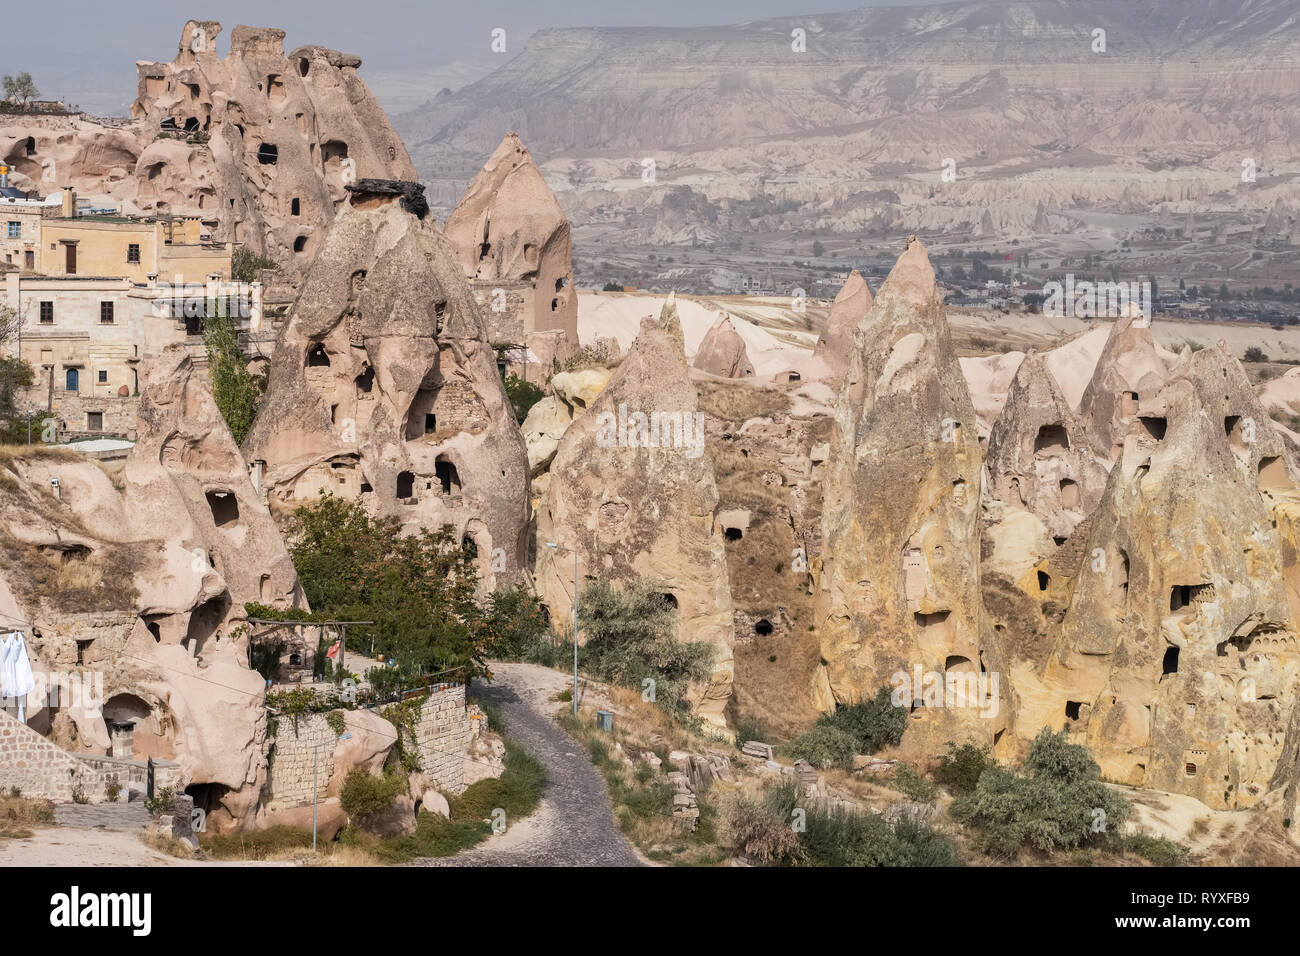 Famouse rock formations in Capapdocia, Turkey Stock Photo